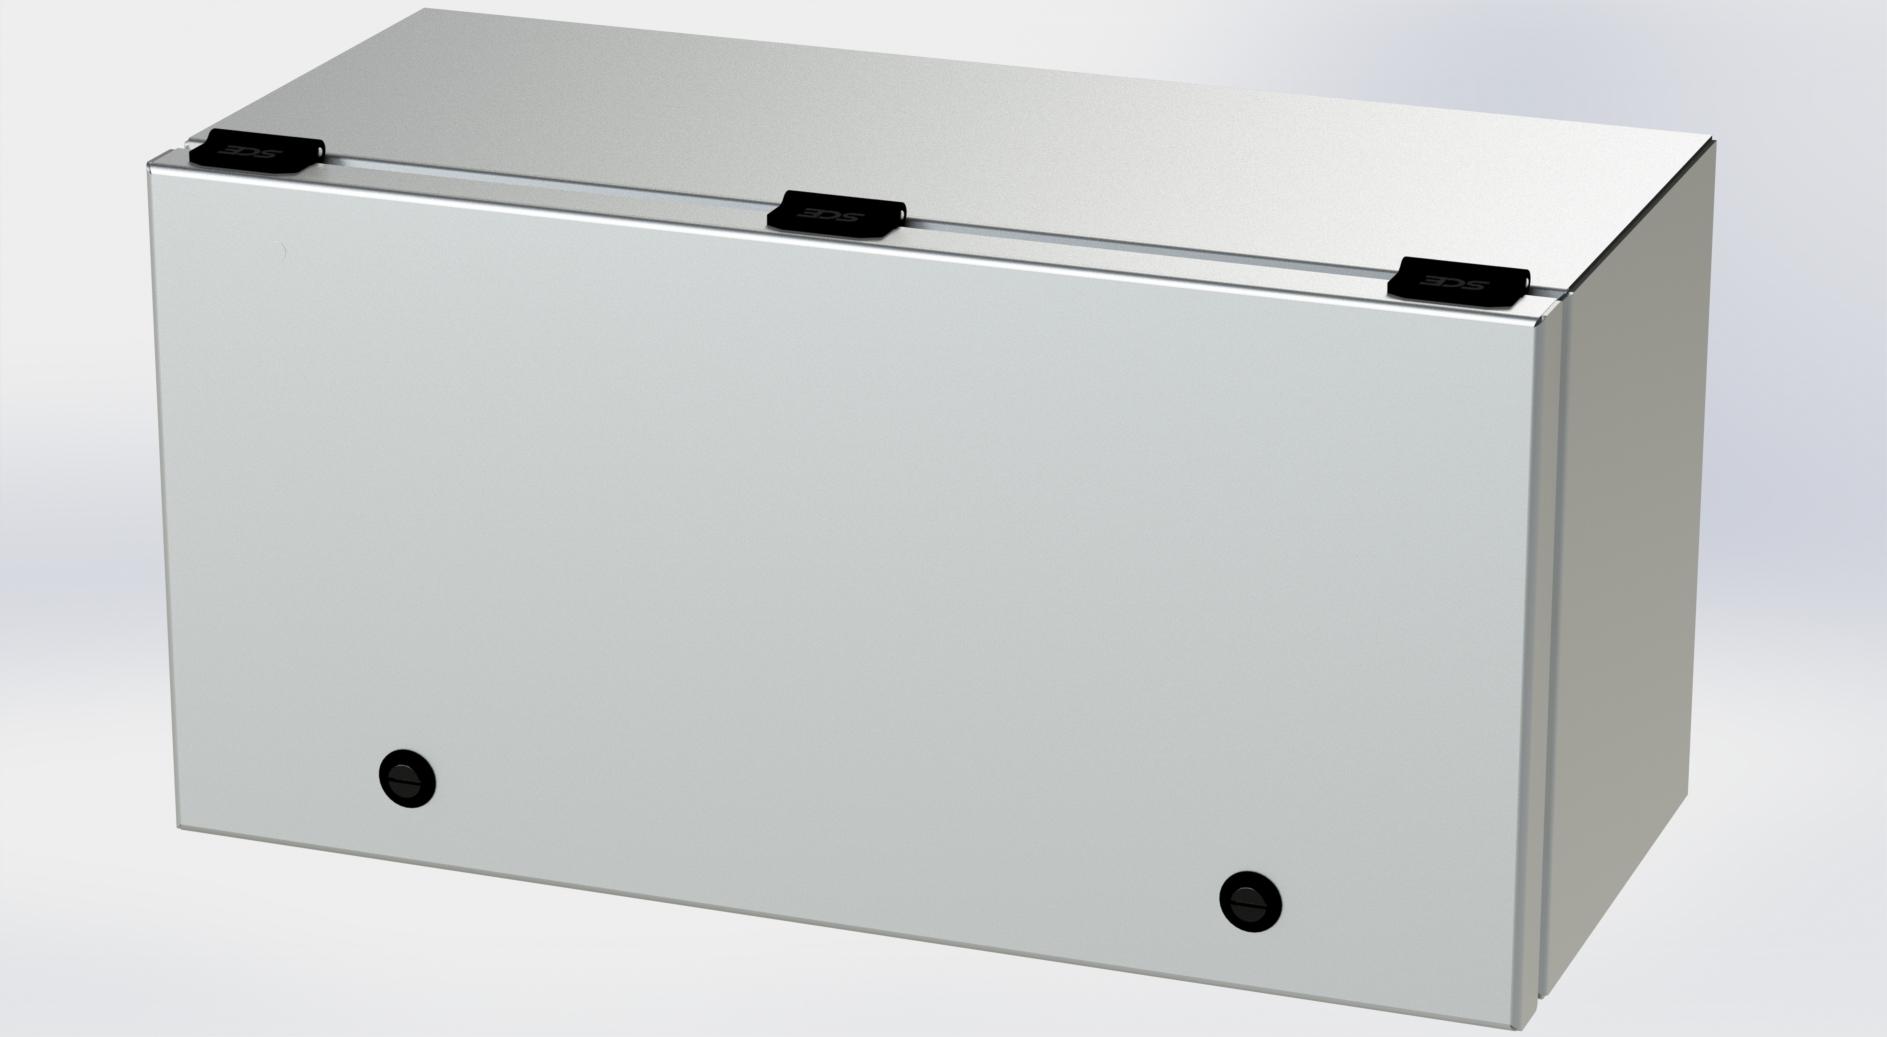 Saginaw Control SCE-L9188ELJSS S.S. ELJ Trough Enclosure, Height:9.00", Width:18.00", Depth:8.00", #4 brushed finish on all exterior surfaces. Optional sub-panels are powder coated white.